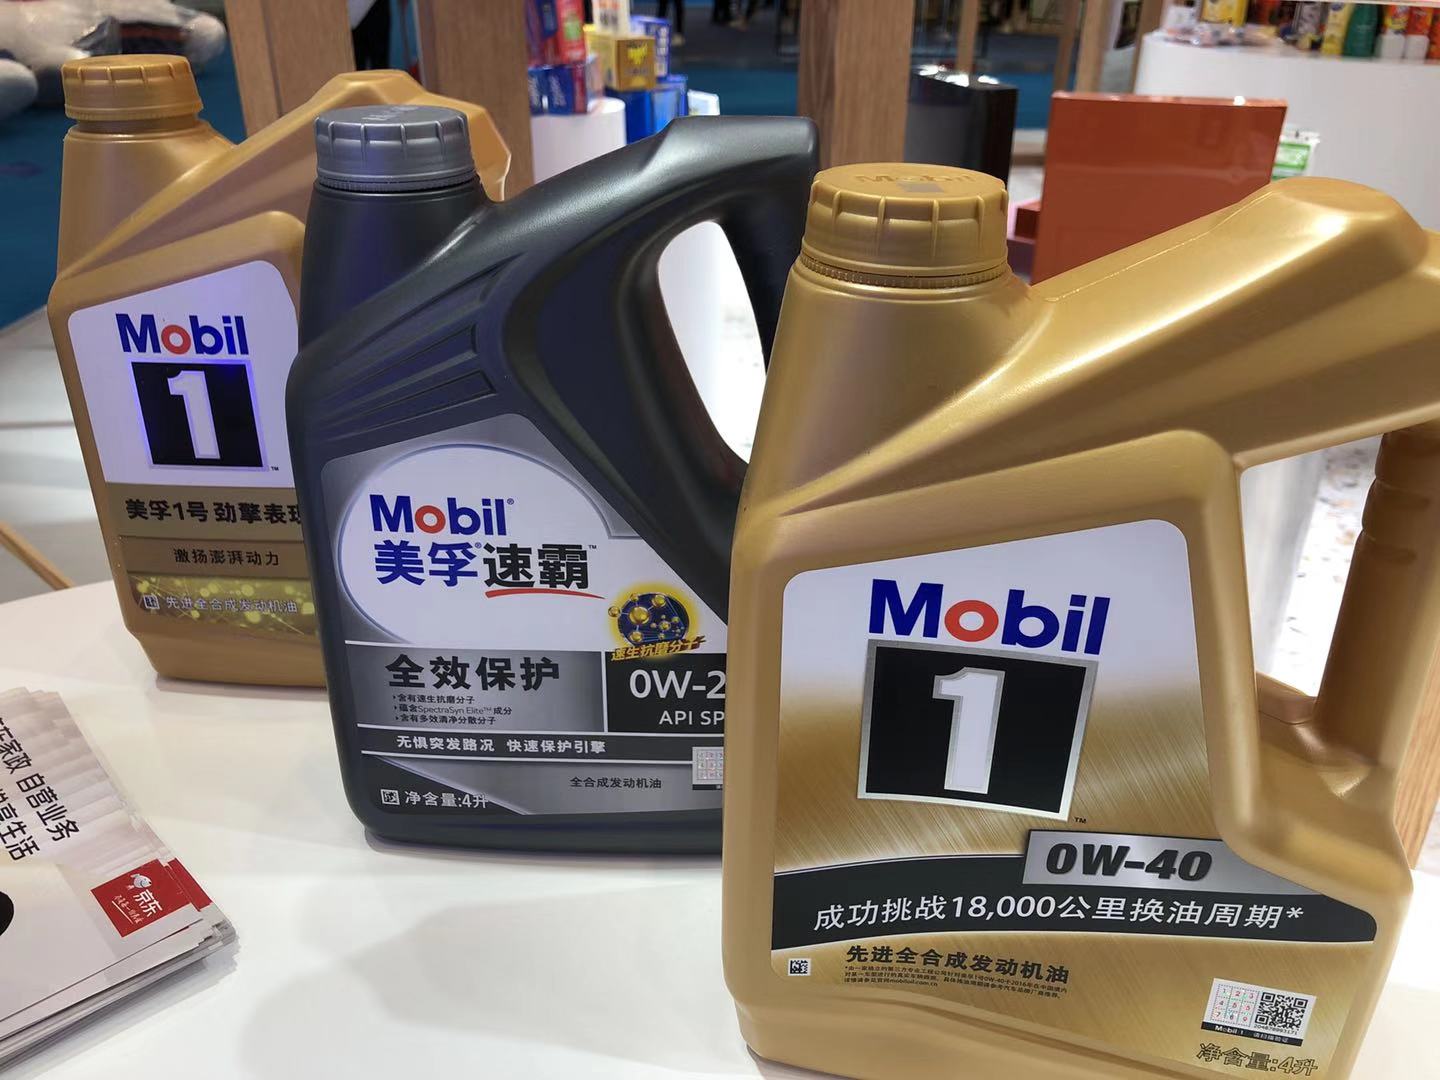 Mobil’s products are sold on JD.com through both JD’s self-operated online store and the brand’s flagship store.